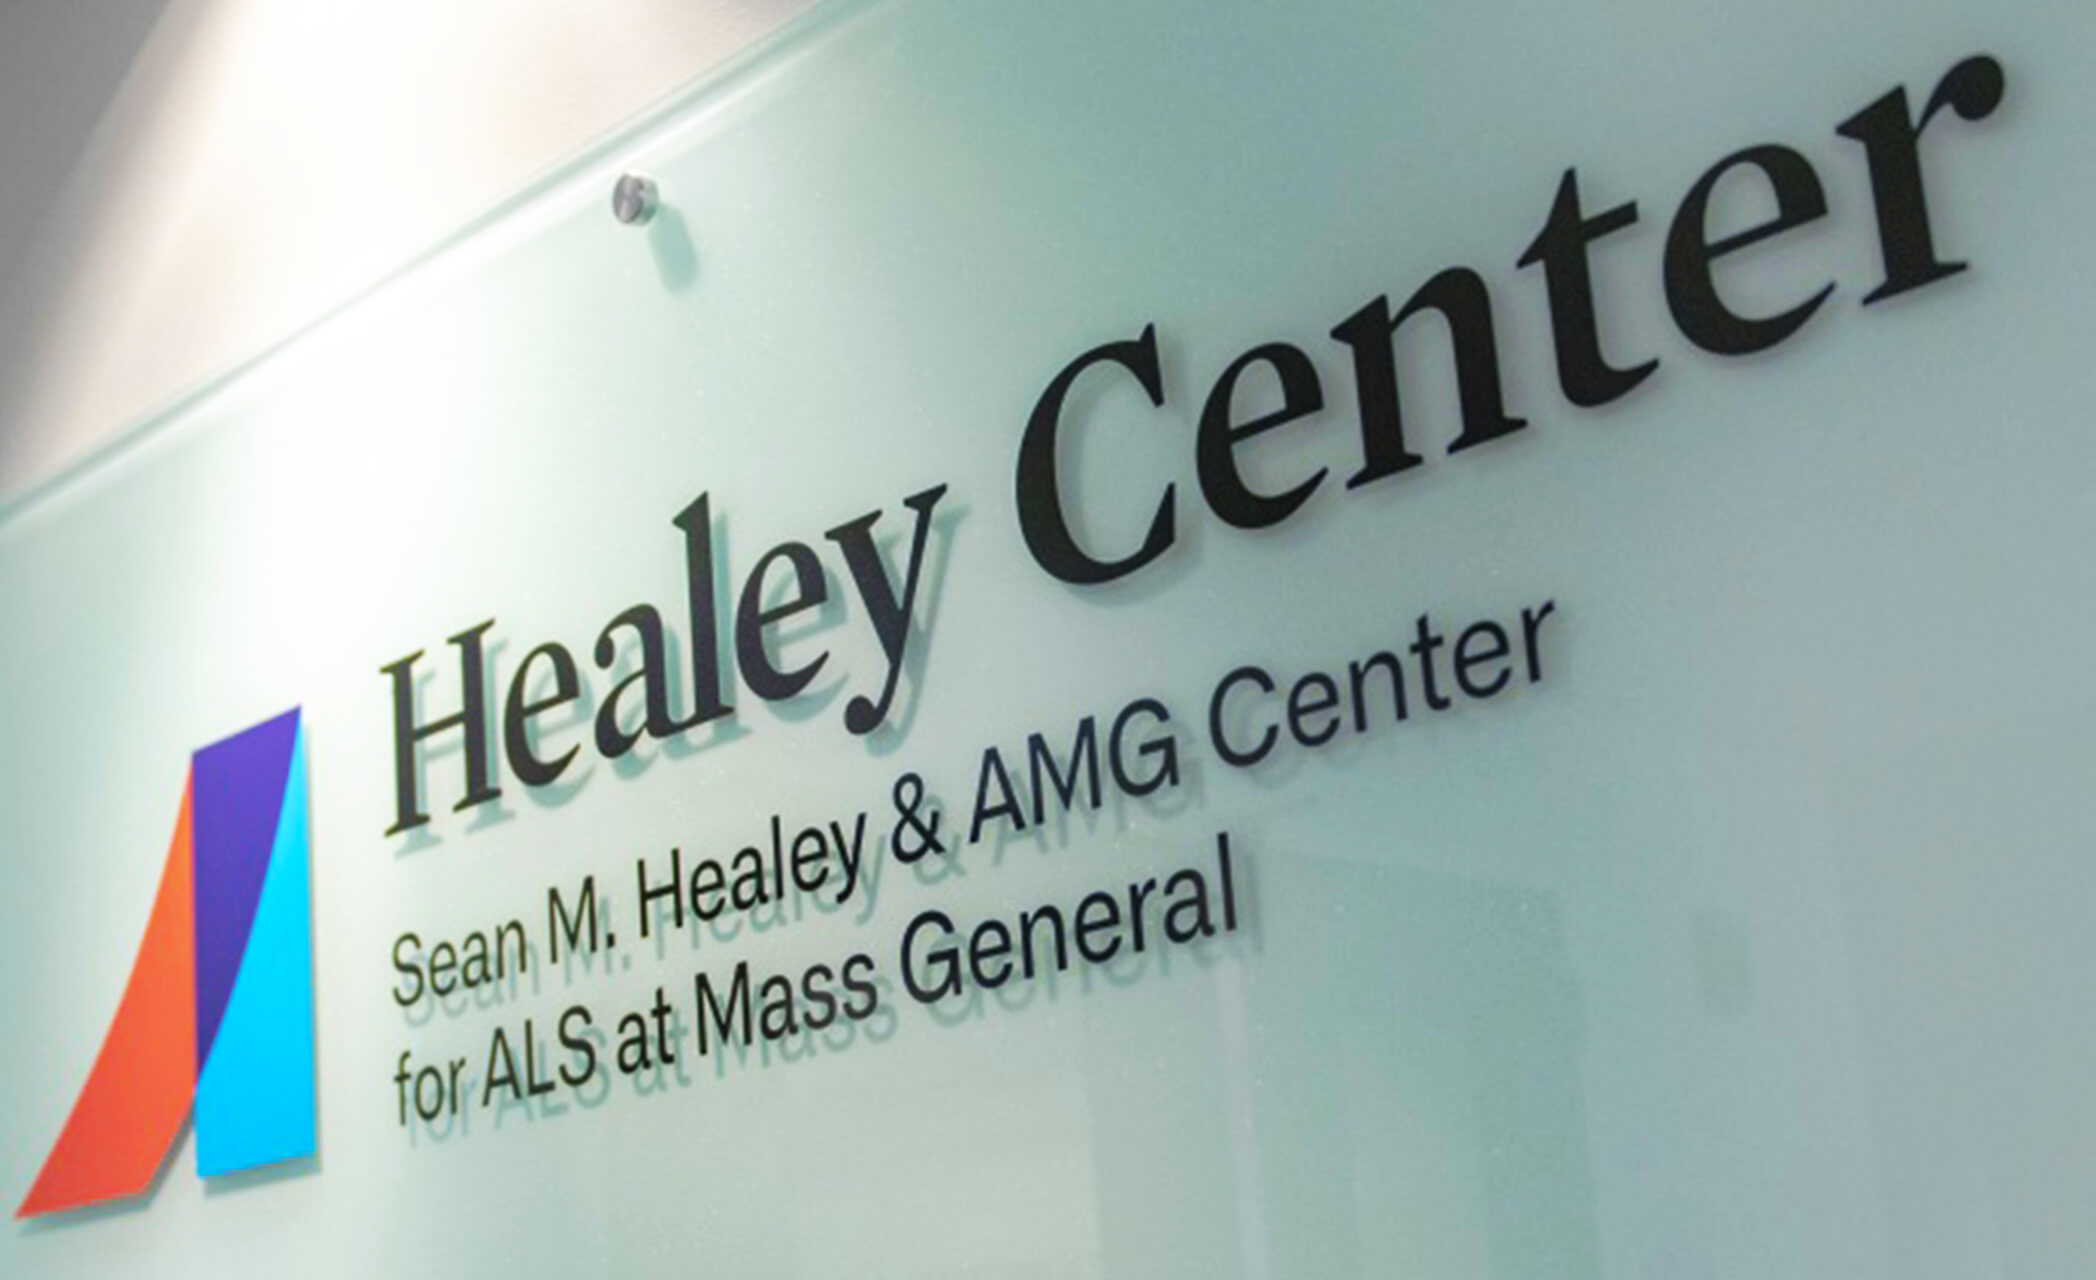 Sean M. Healey & AMG Center for ALS at Mass General